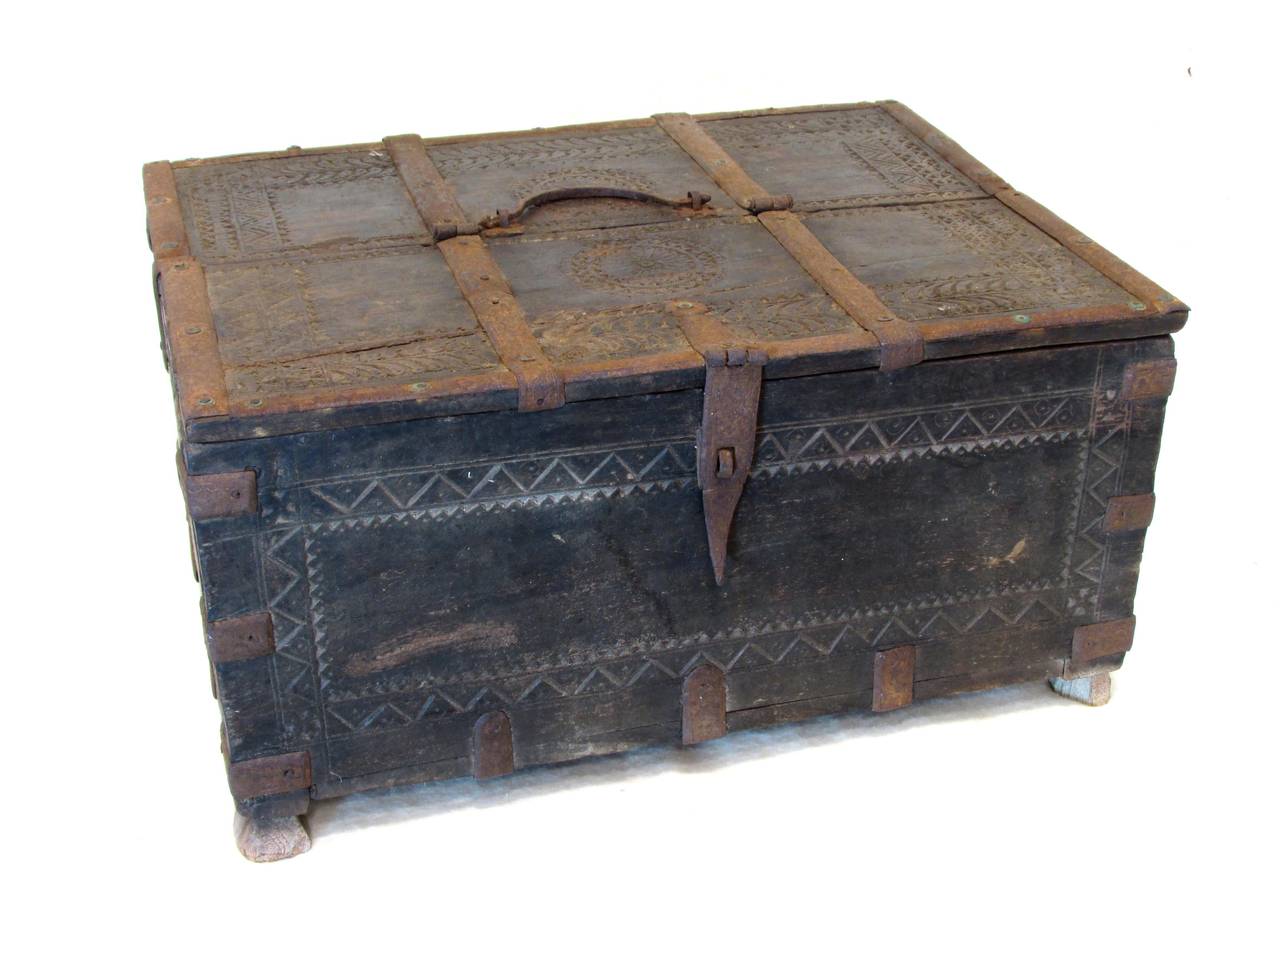 Small worn and weathered carved teak wood box with iron decoration